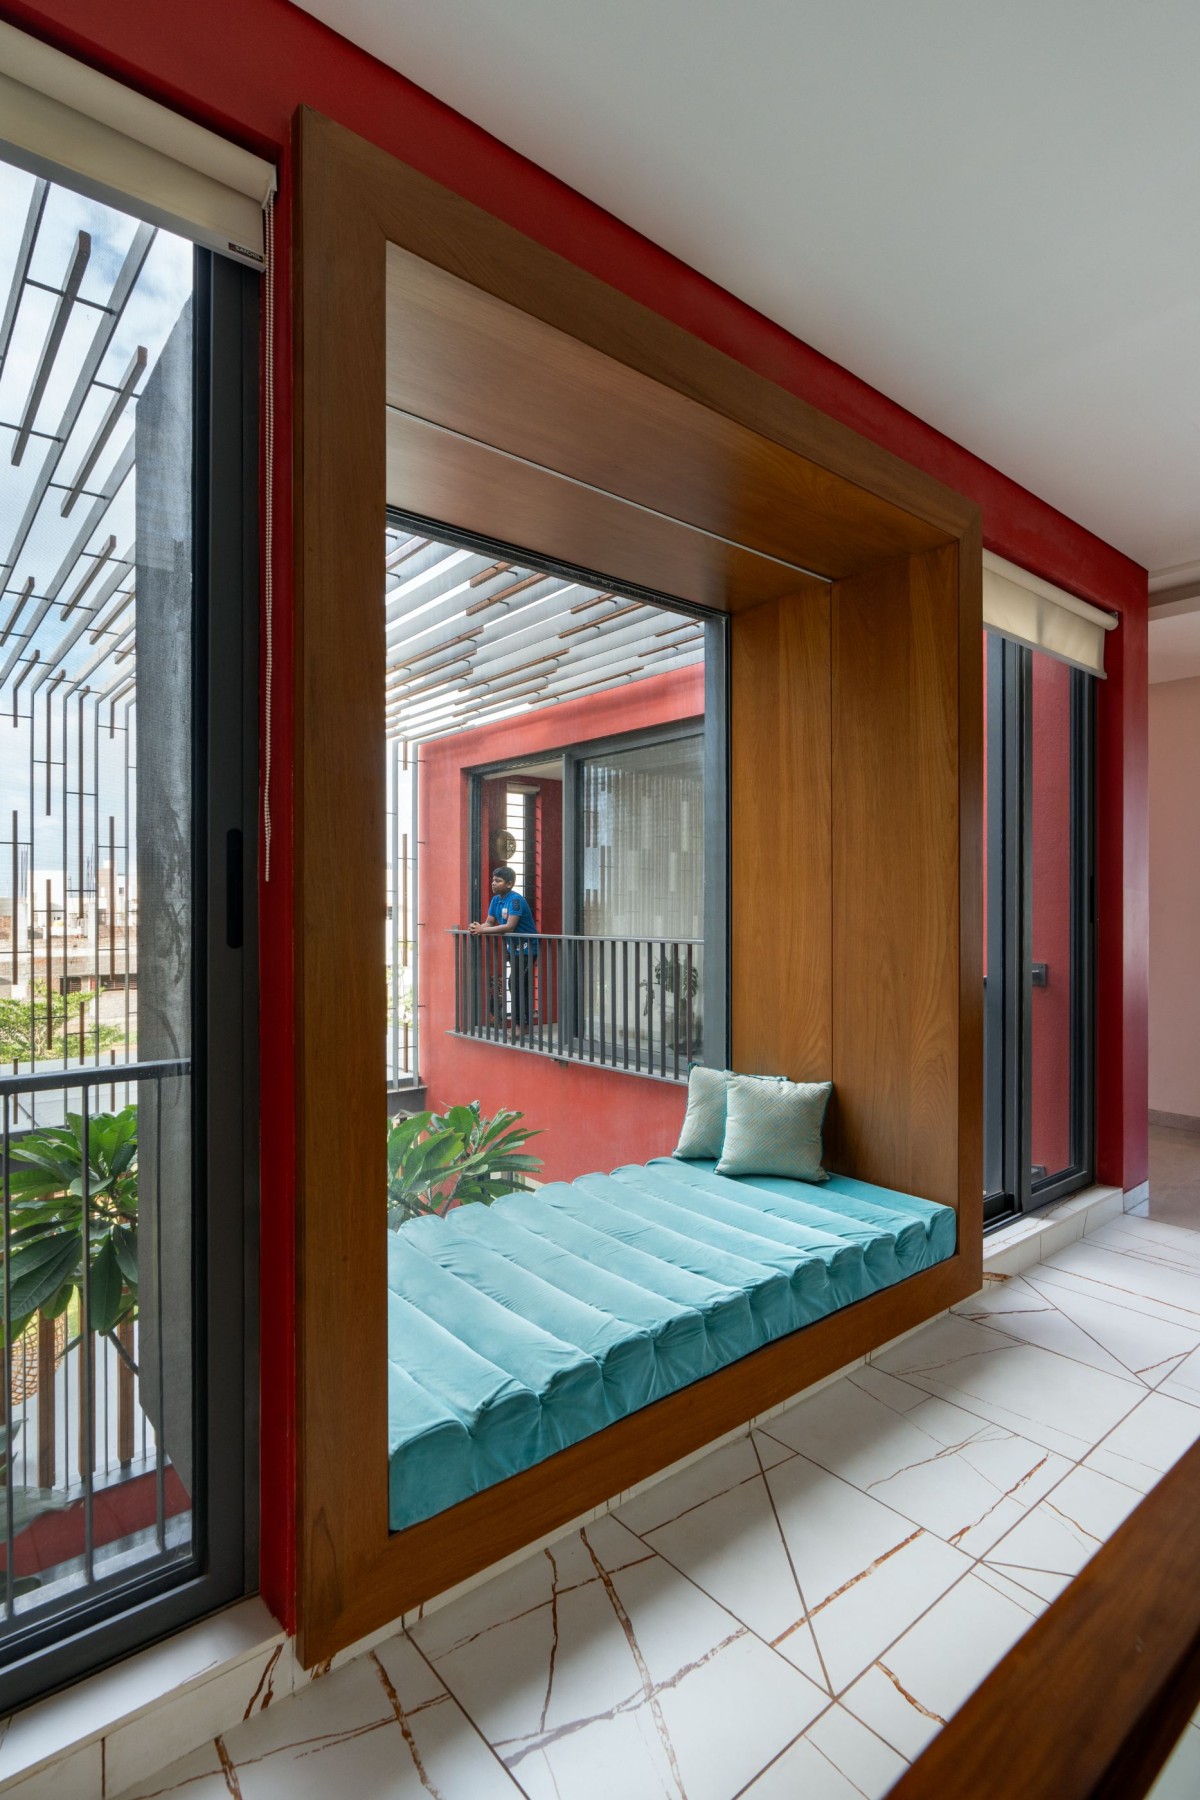 Day Bed with courtyard view of The Red Courtyard House by Jacob + Rathodi Architects